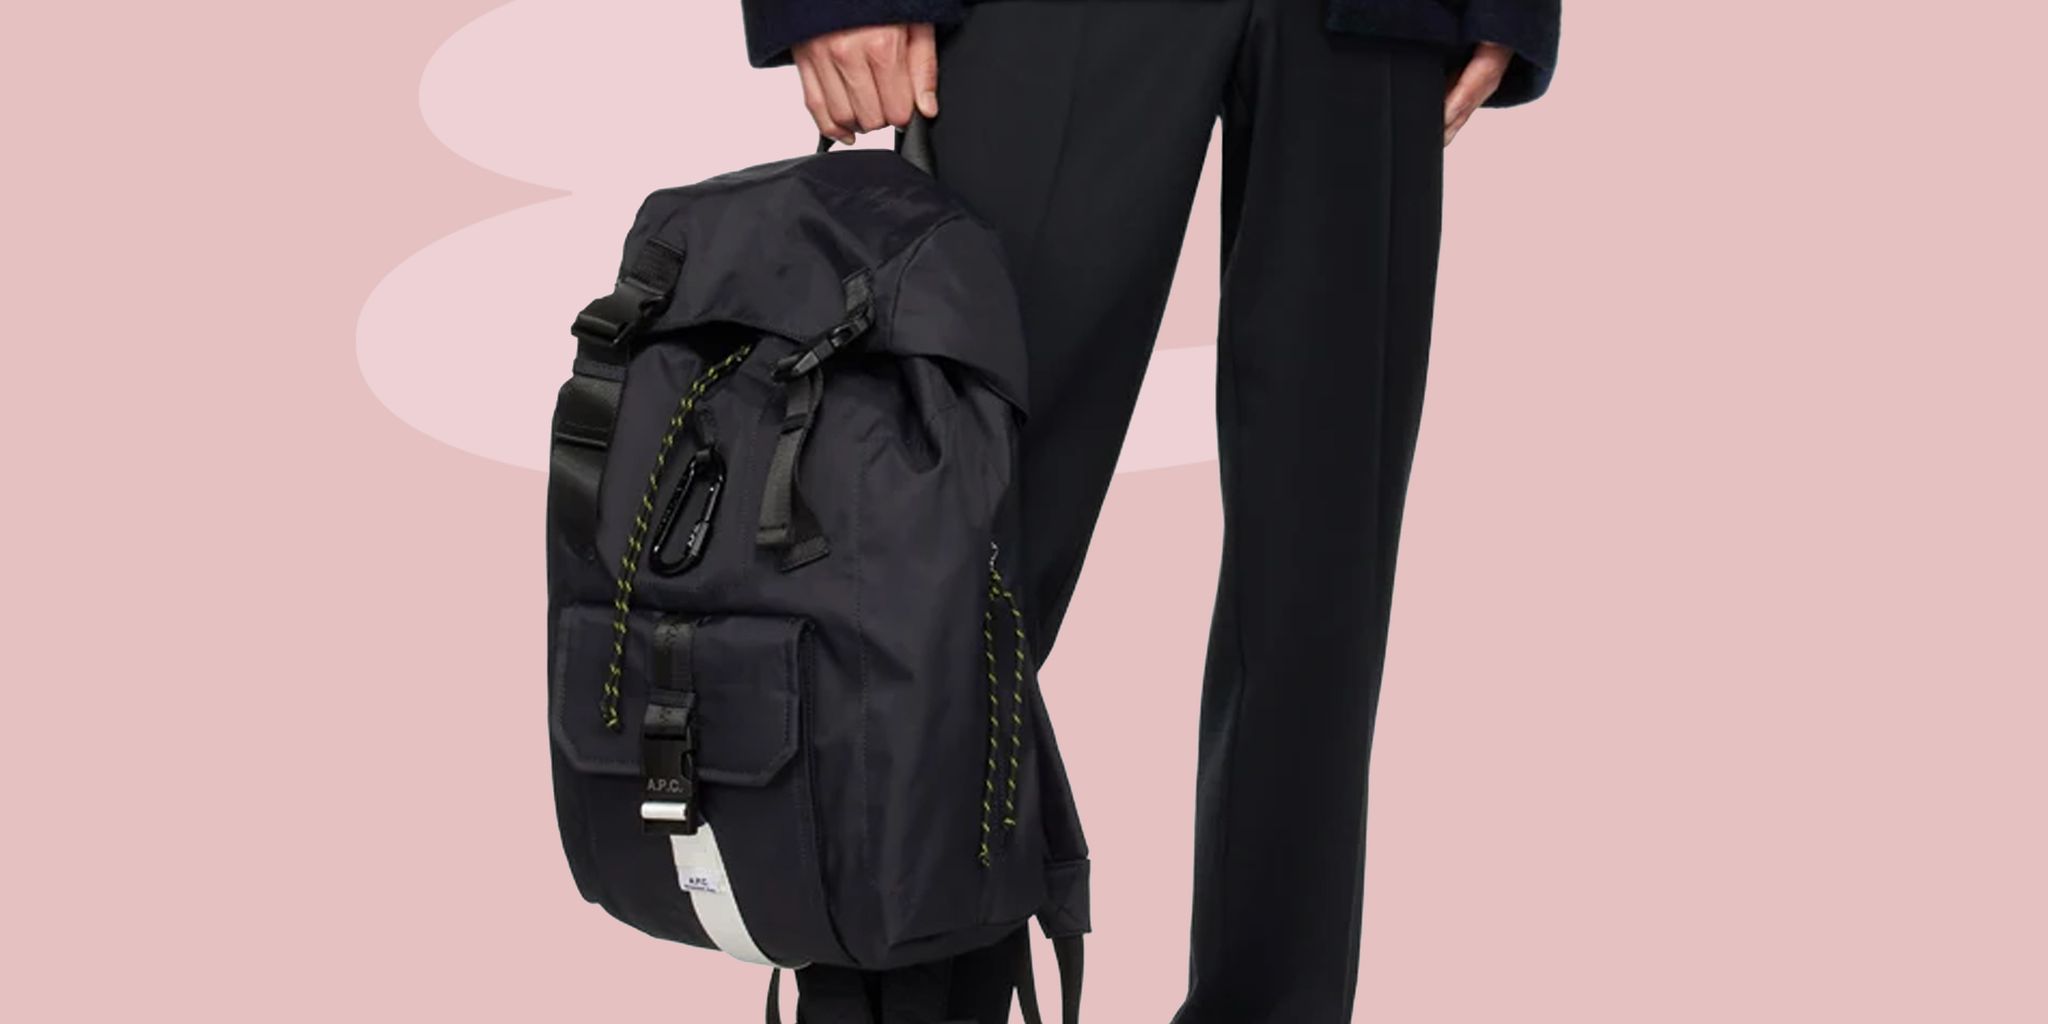 The backpack for all necessities. Get up to P500 OFF on our Bags Colle